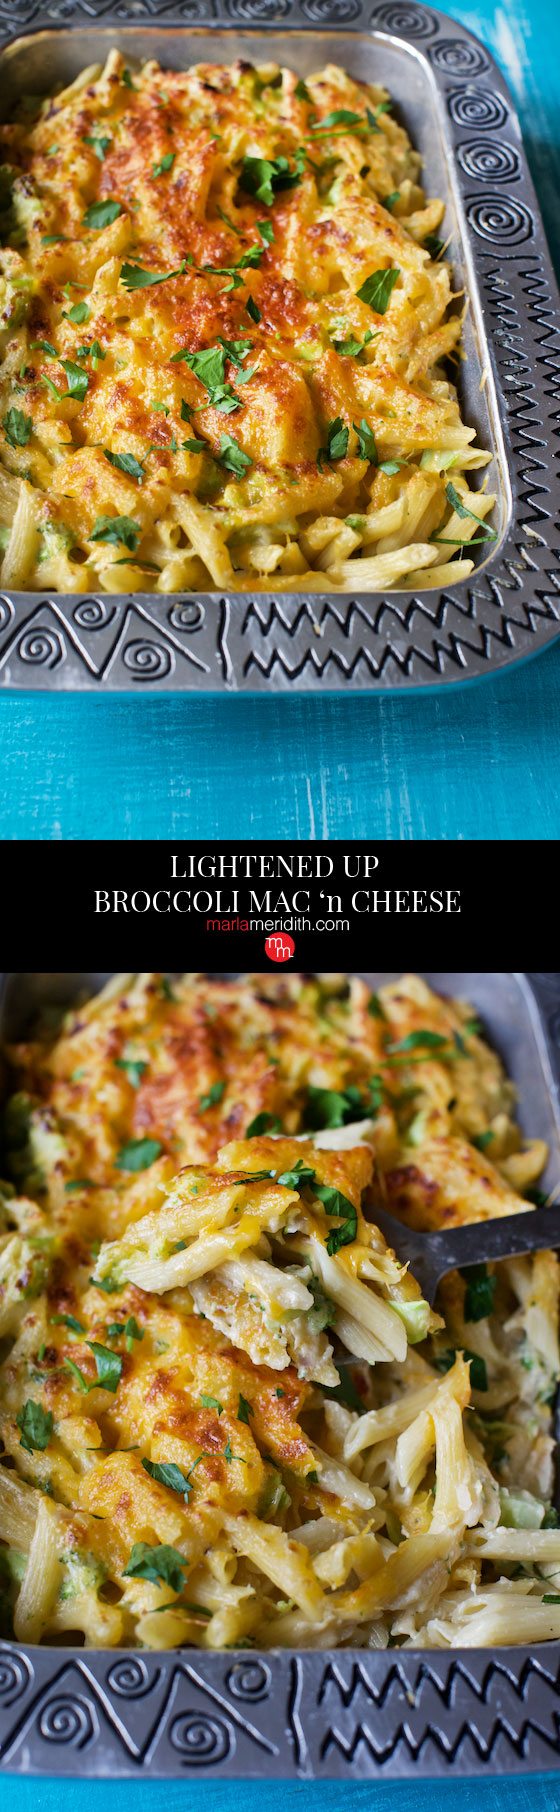 Lightened Up Broccoli Mac 'n Cheese recipe. You won't miss the high calorie version. Great way to get kids to eat broccoli! MarlaMeridith.com ( @marlameridith)